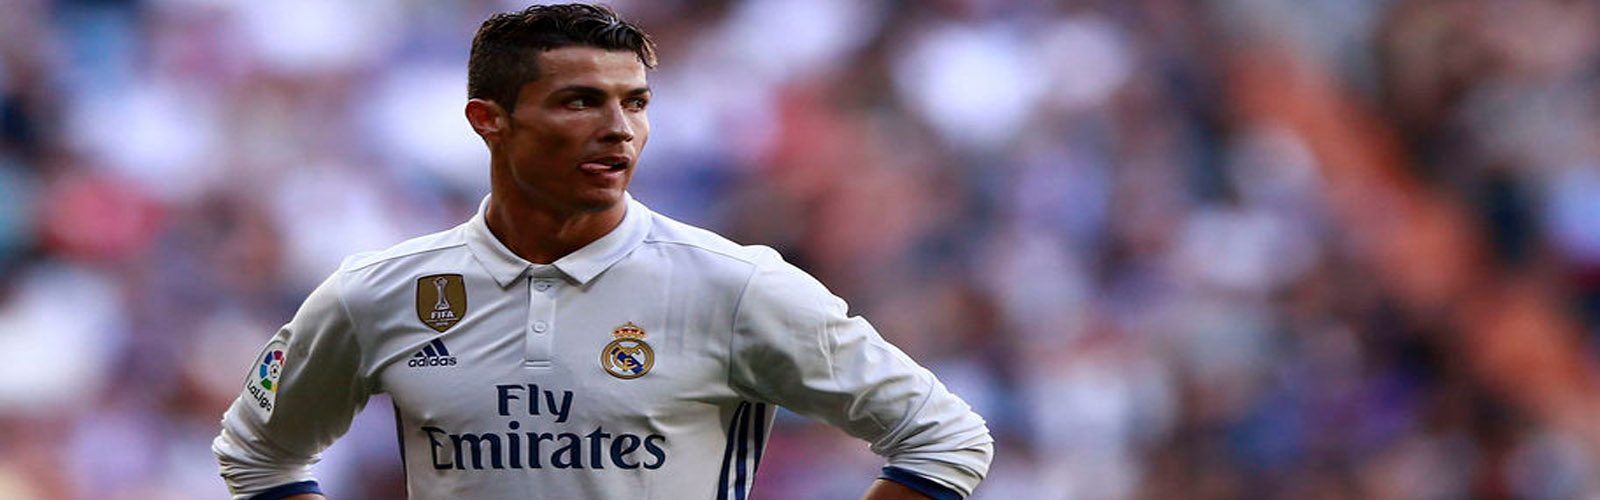 Cristiano Ronaldo tops 'Forbes' list of richest athletes